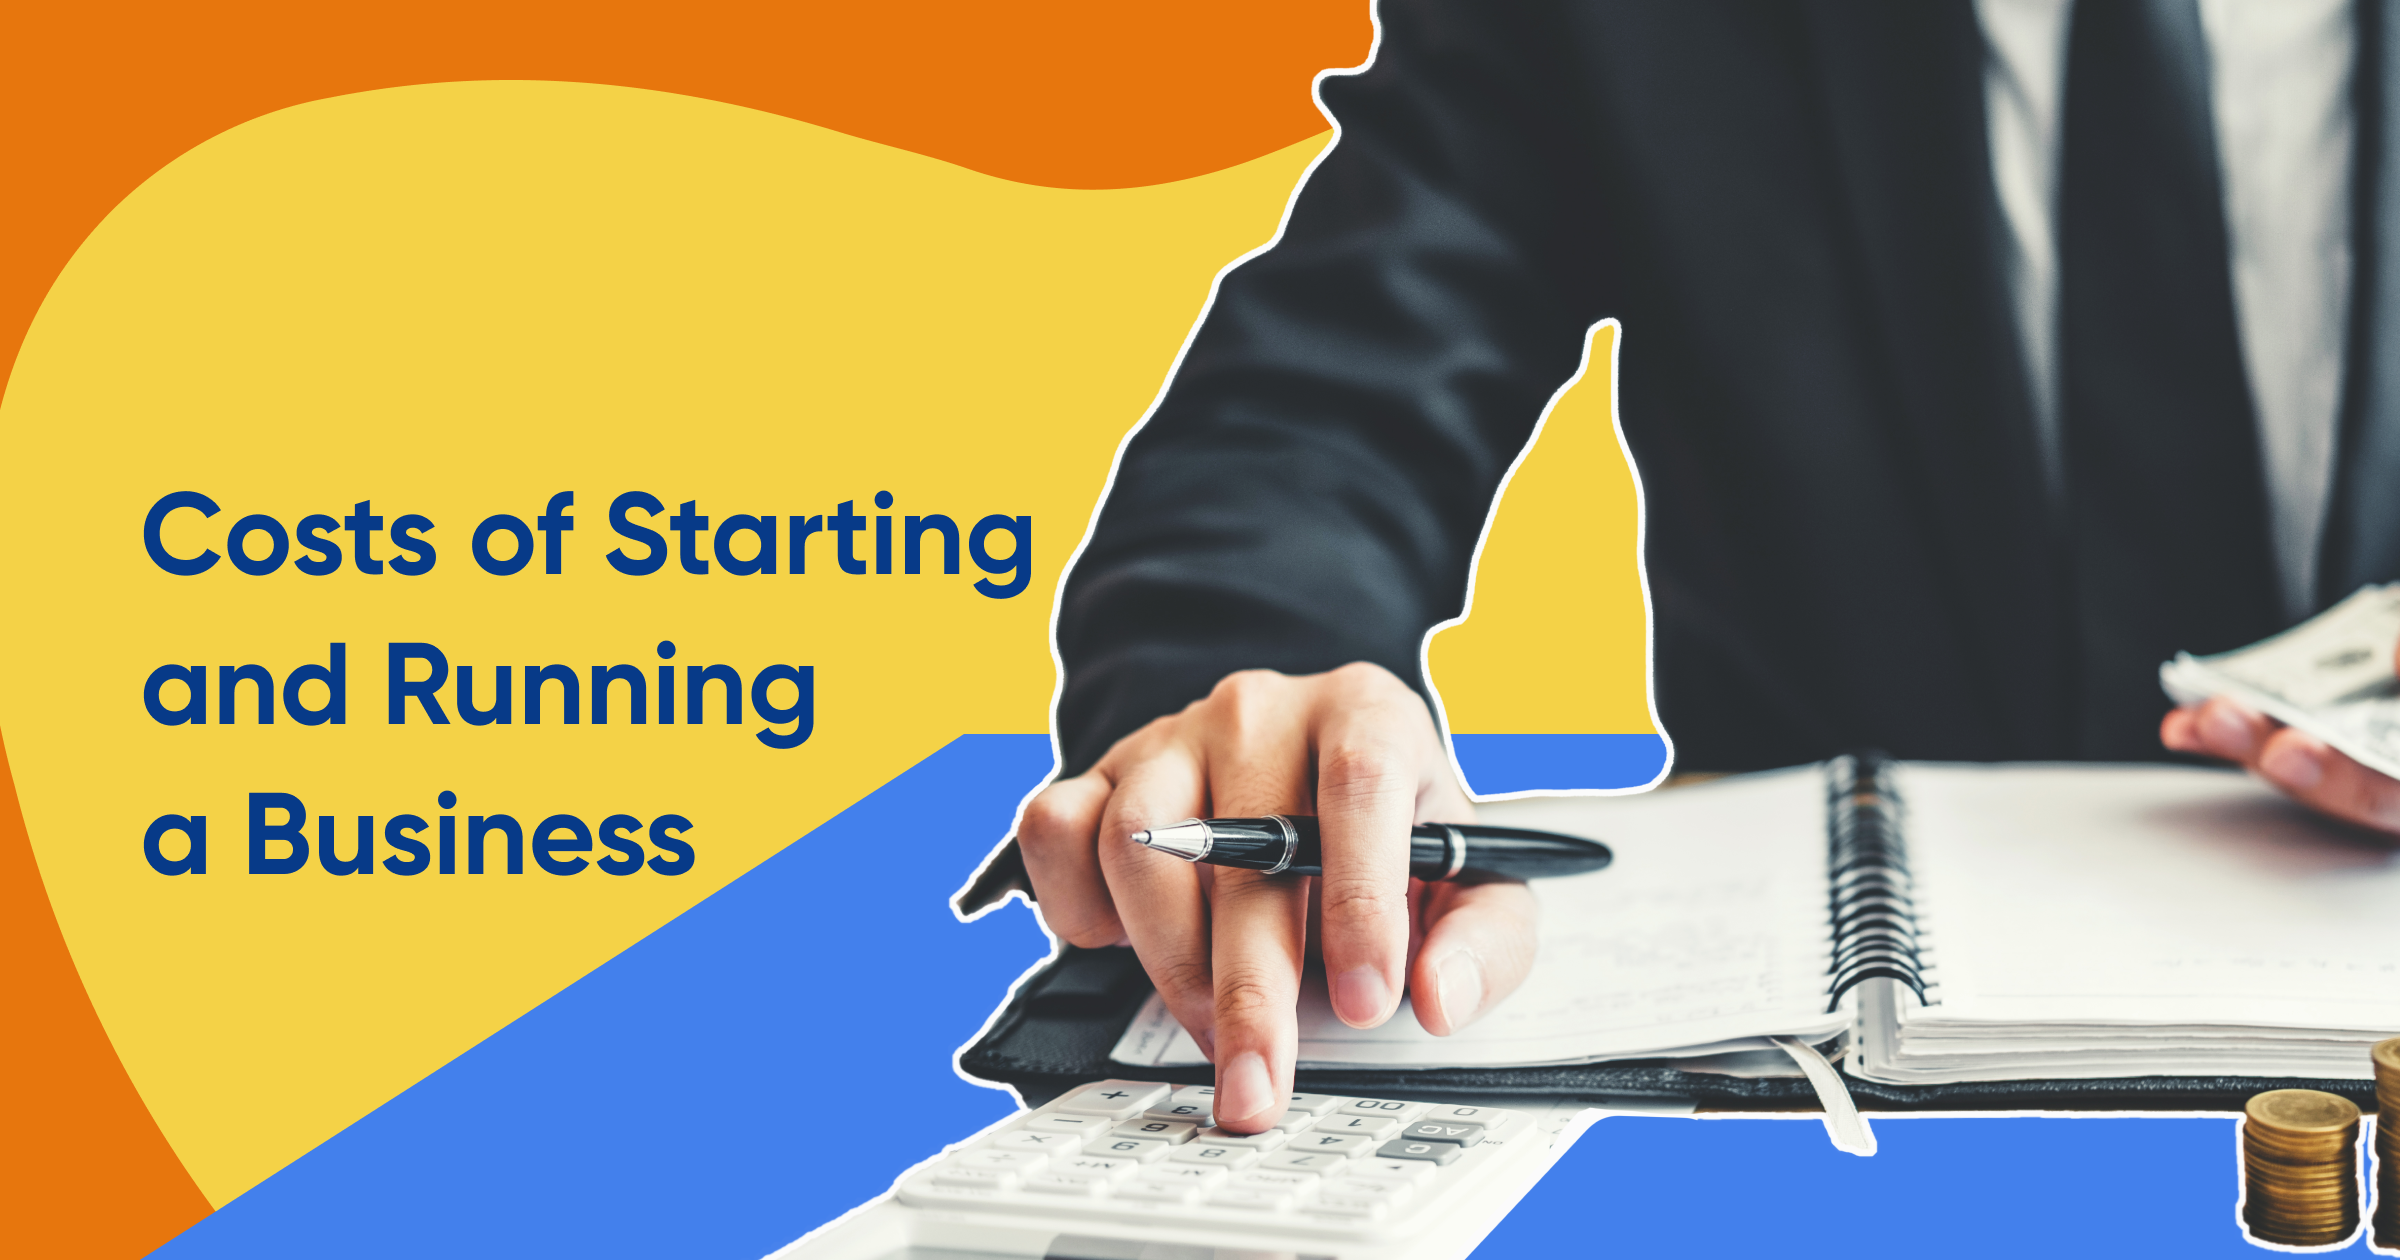 Hidden costs of starting and running a business